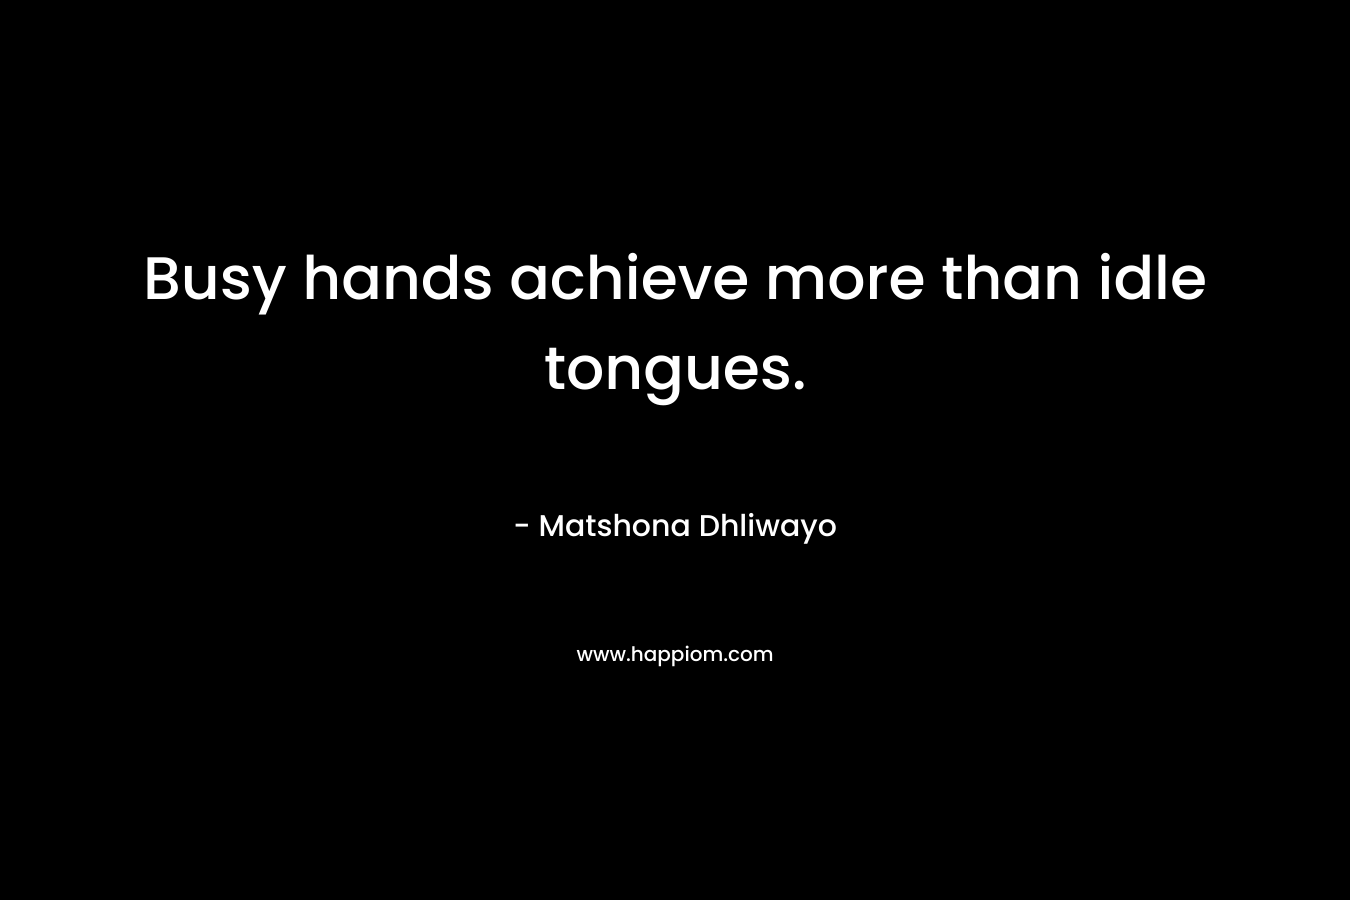 Busy hands achieve more than idle tongues.